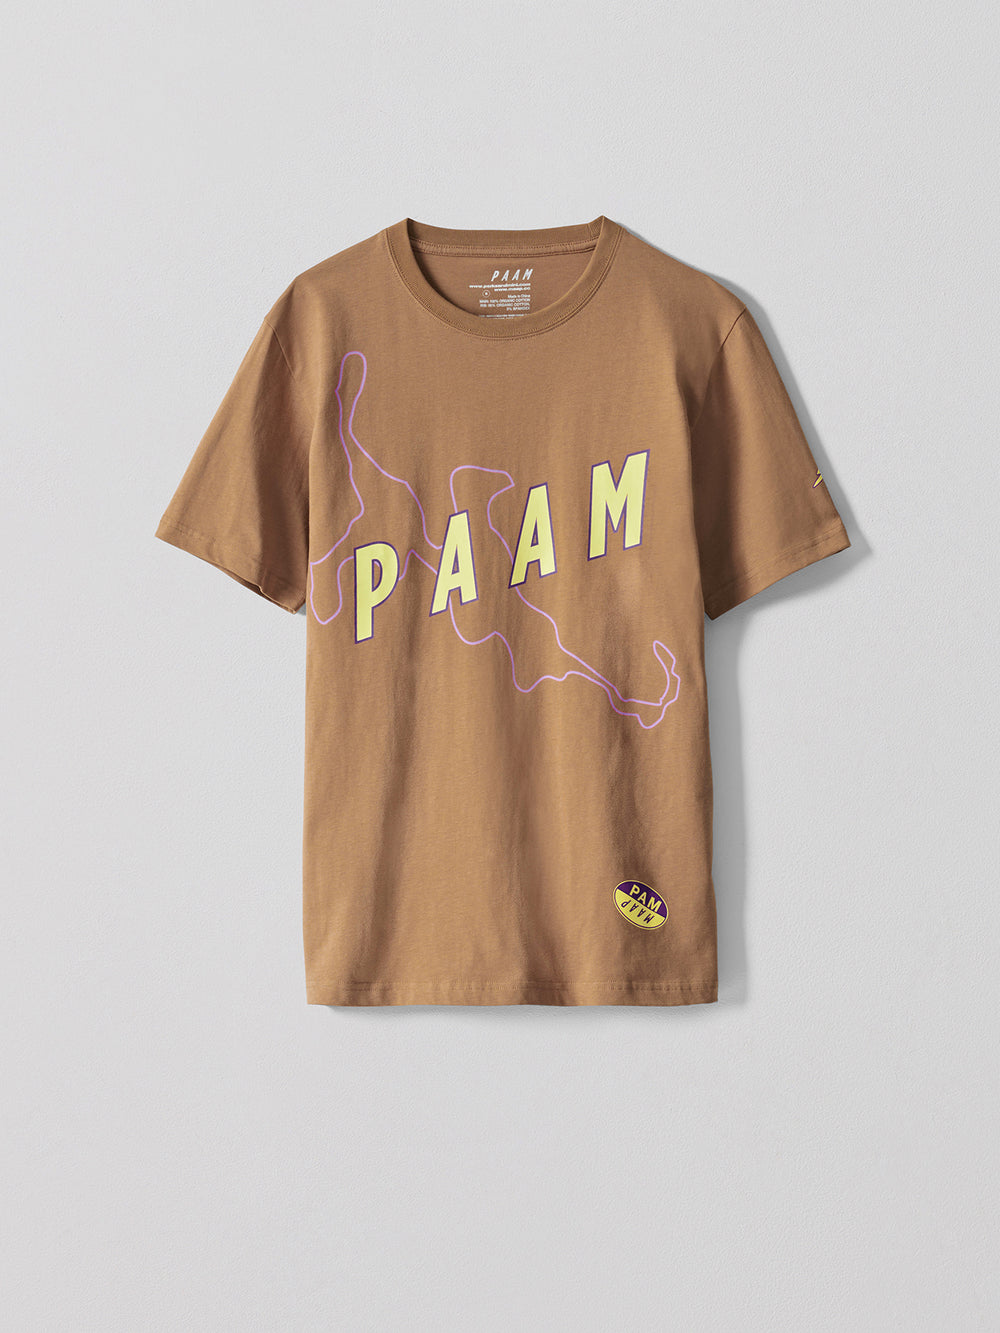 Product Image for PAAM 1.5 Tee